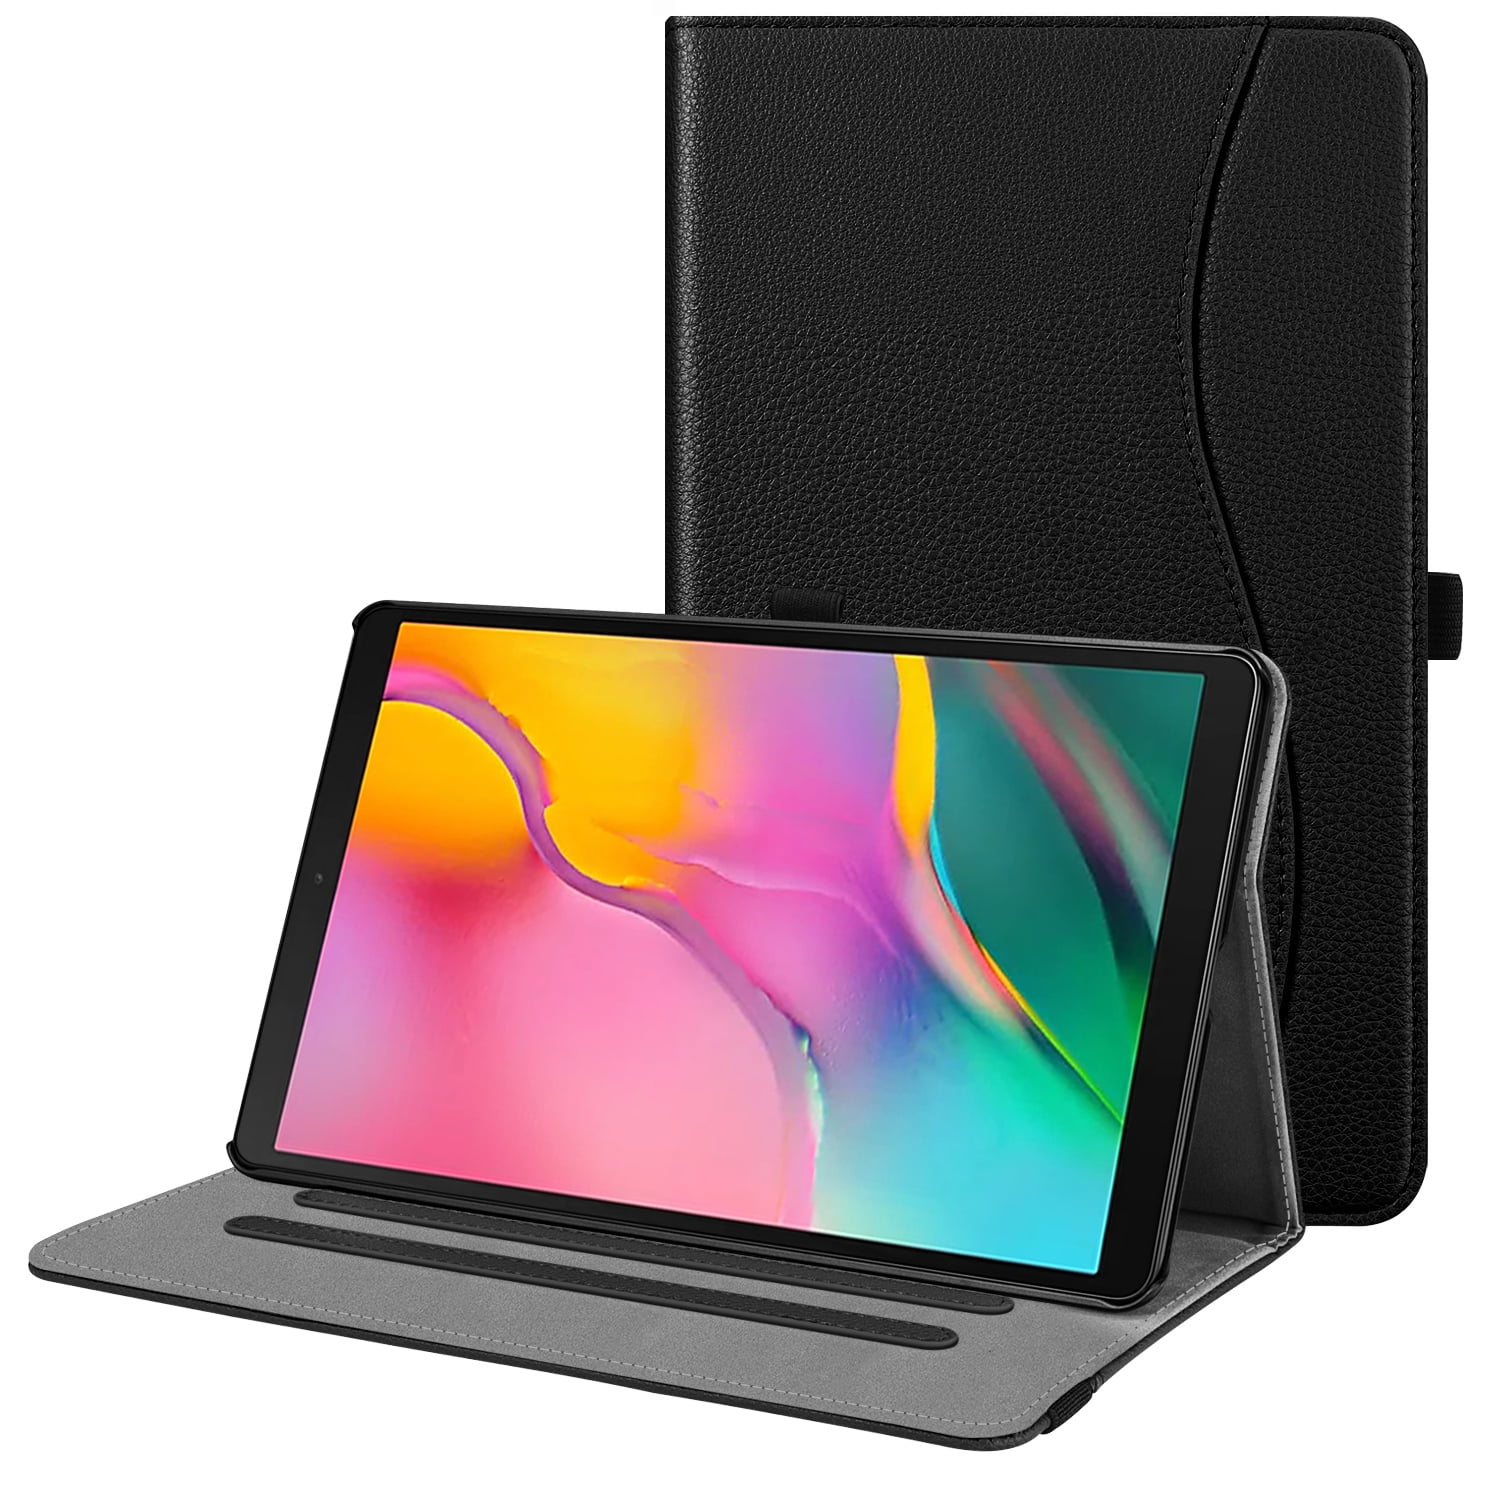 For Samsung Galaxy Tab A 10.1 SM-T510 2019 Tablet Case - [Corner Protection] Multi-Angle View Stand Cover, Black